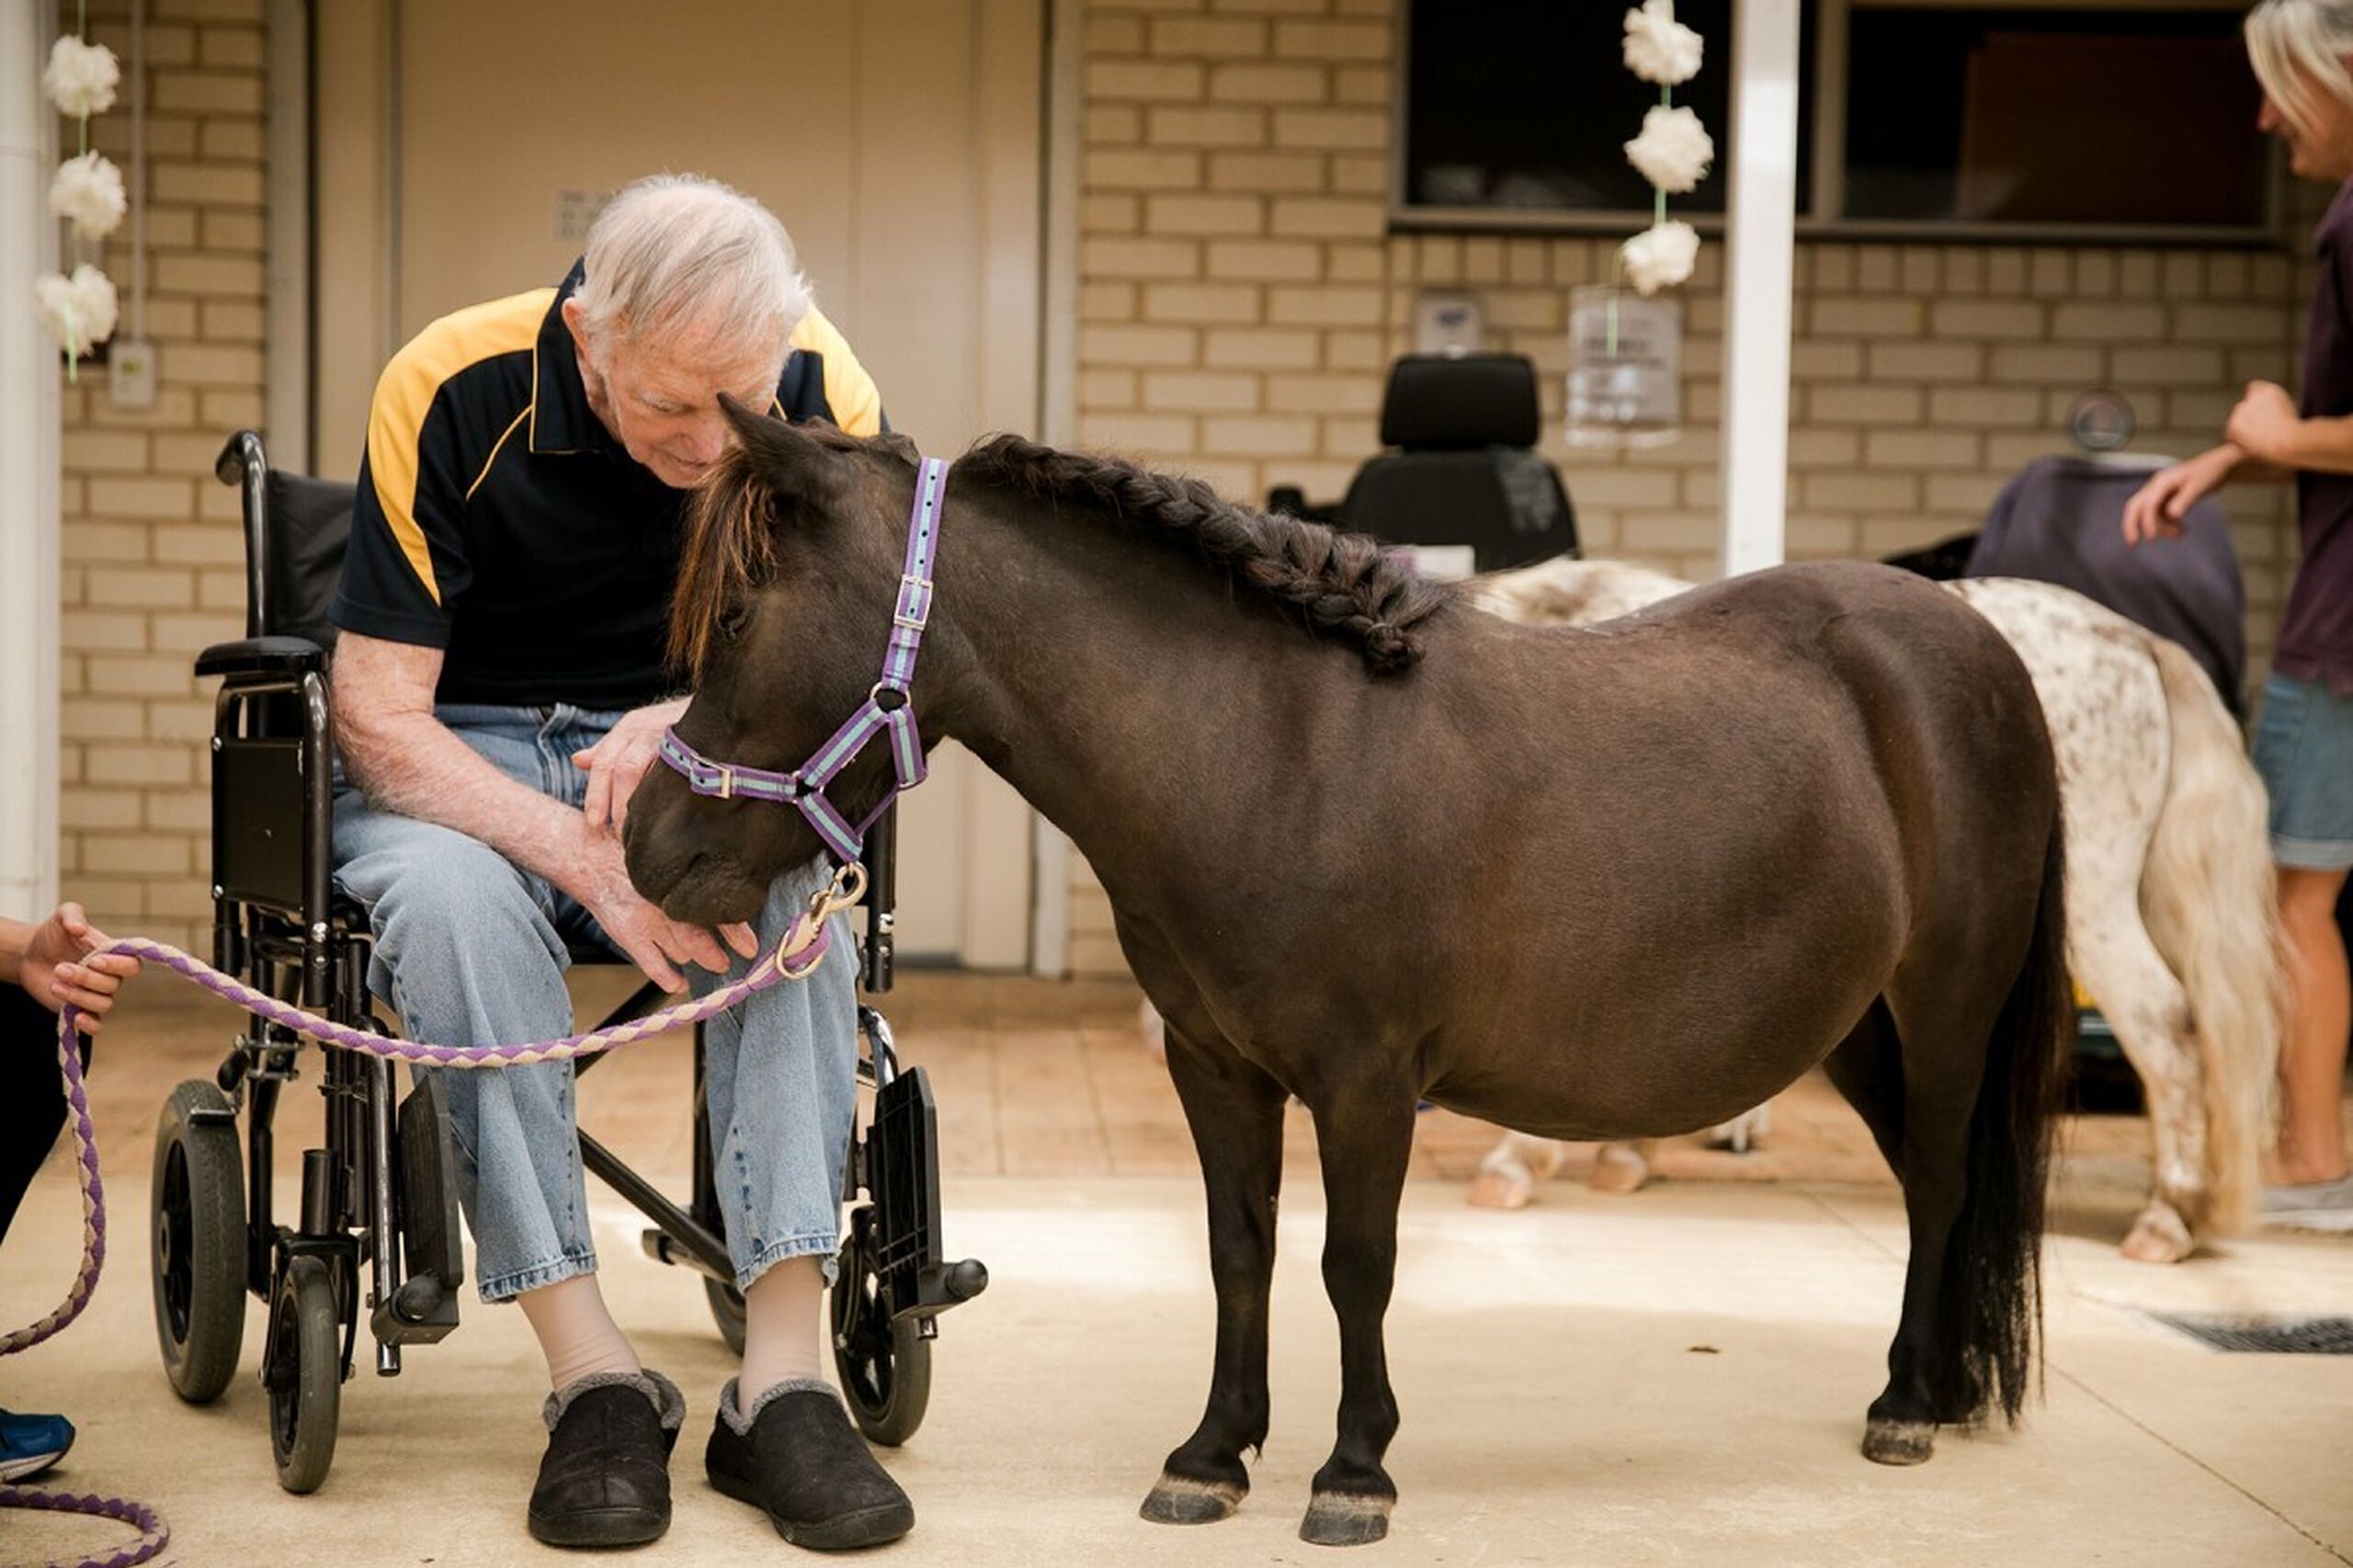 Pony visits stir happy memories for Baptistcare Aged Care residents